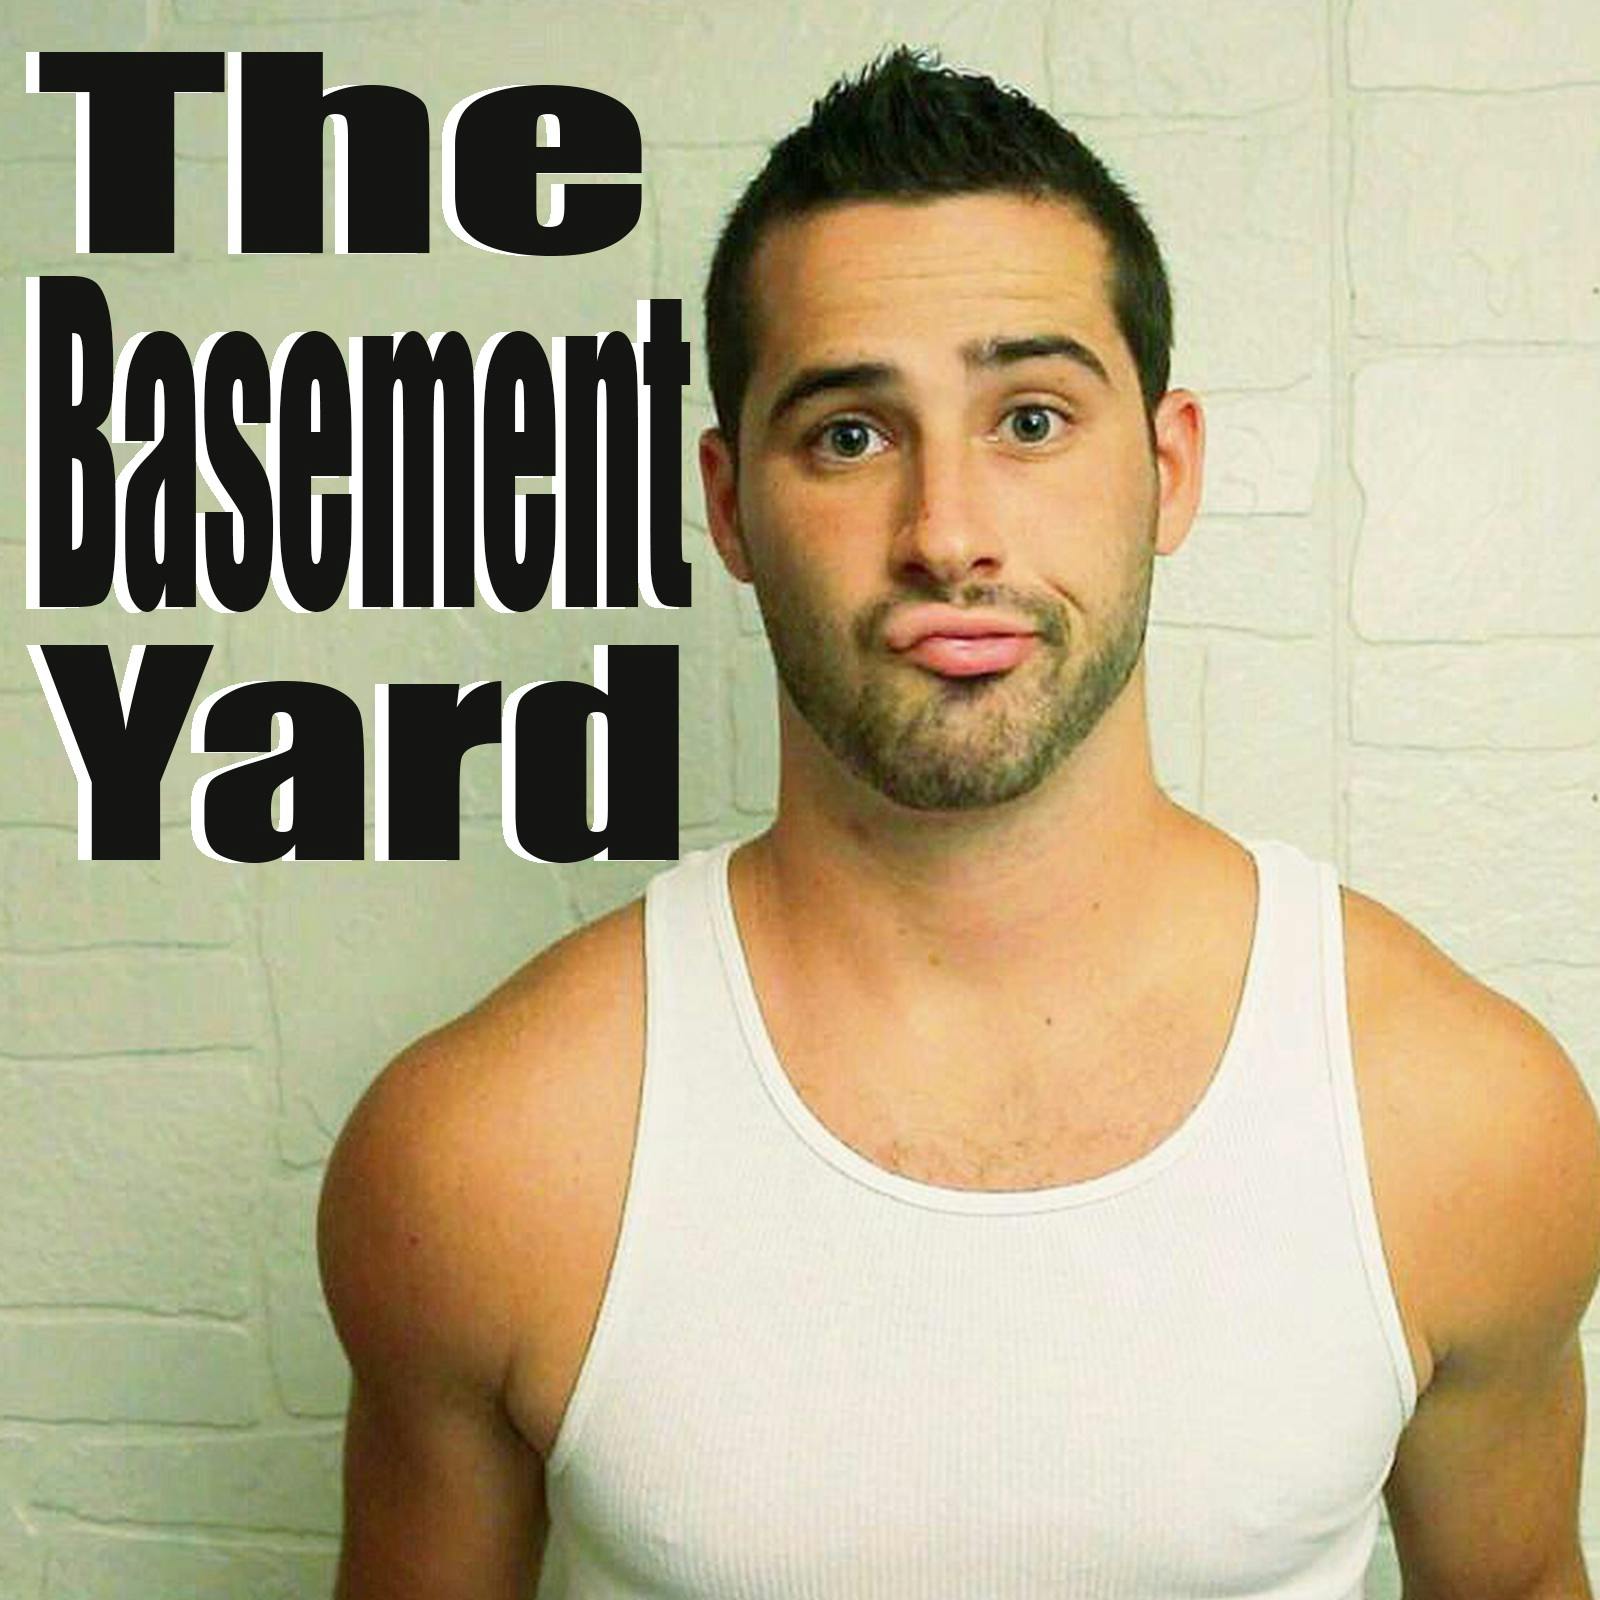 Joey Gatto Is In The Basement by Santagato Studios